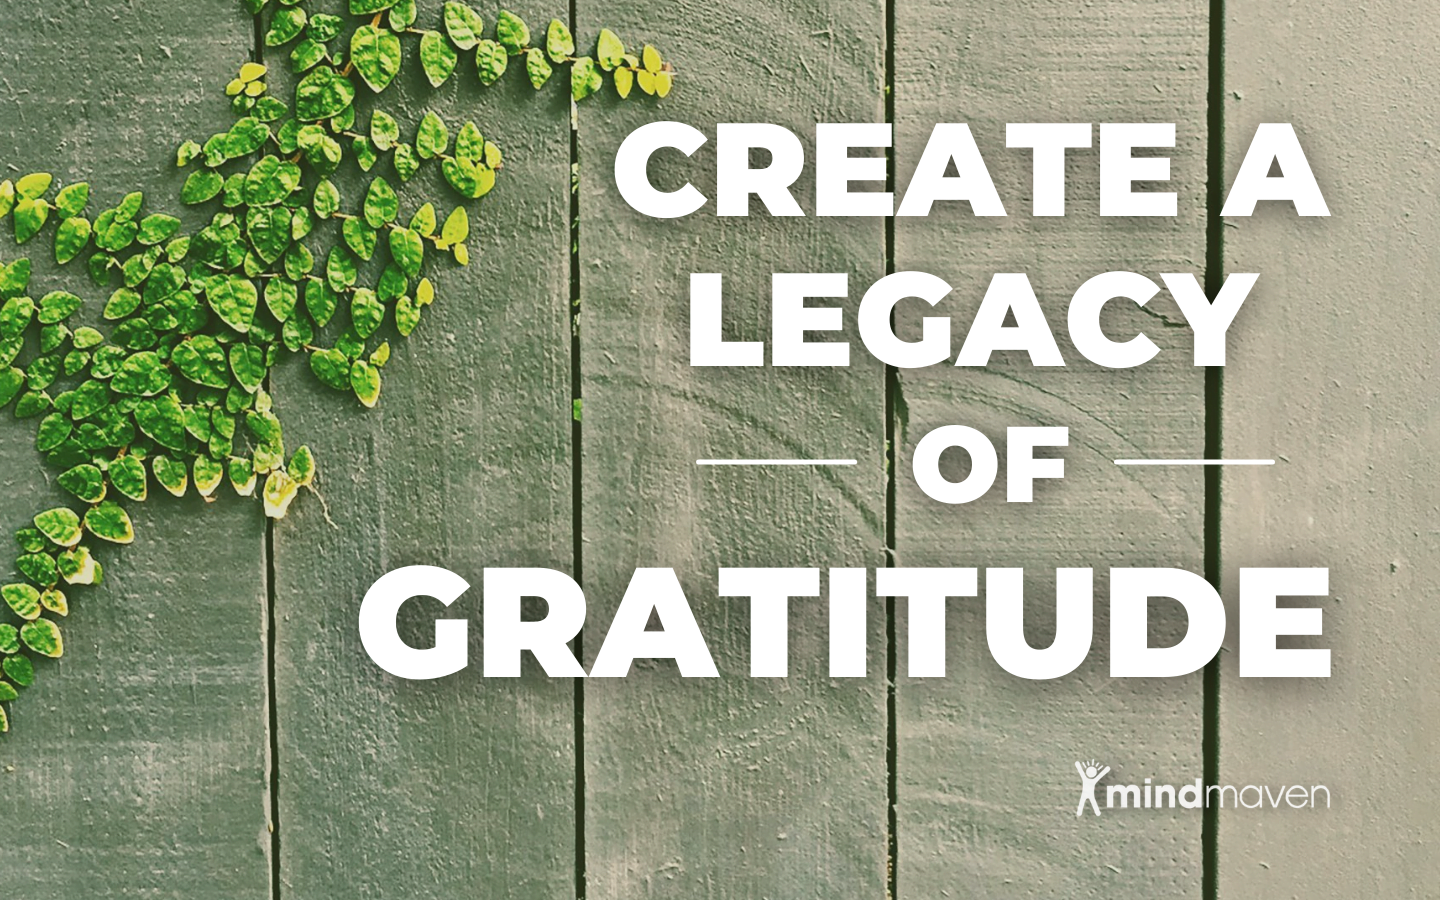 How To Create a Legacy of Gratitude